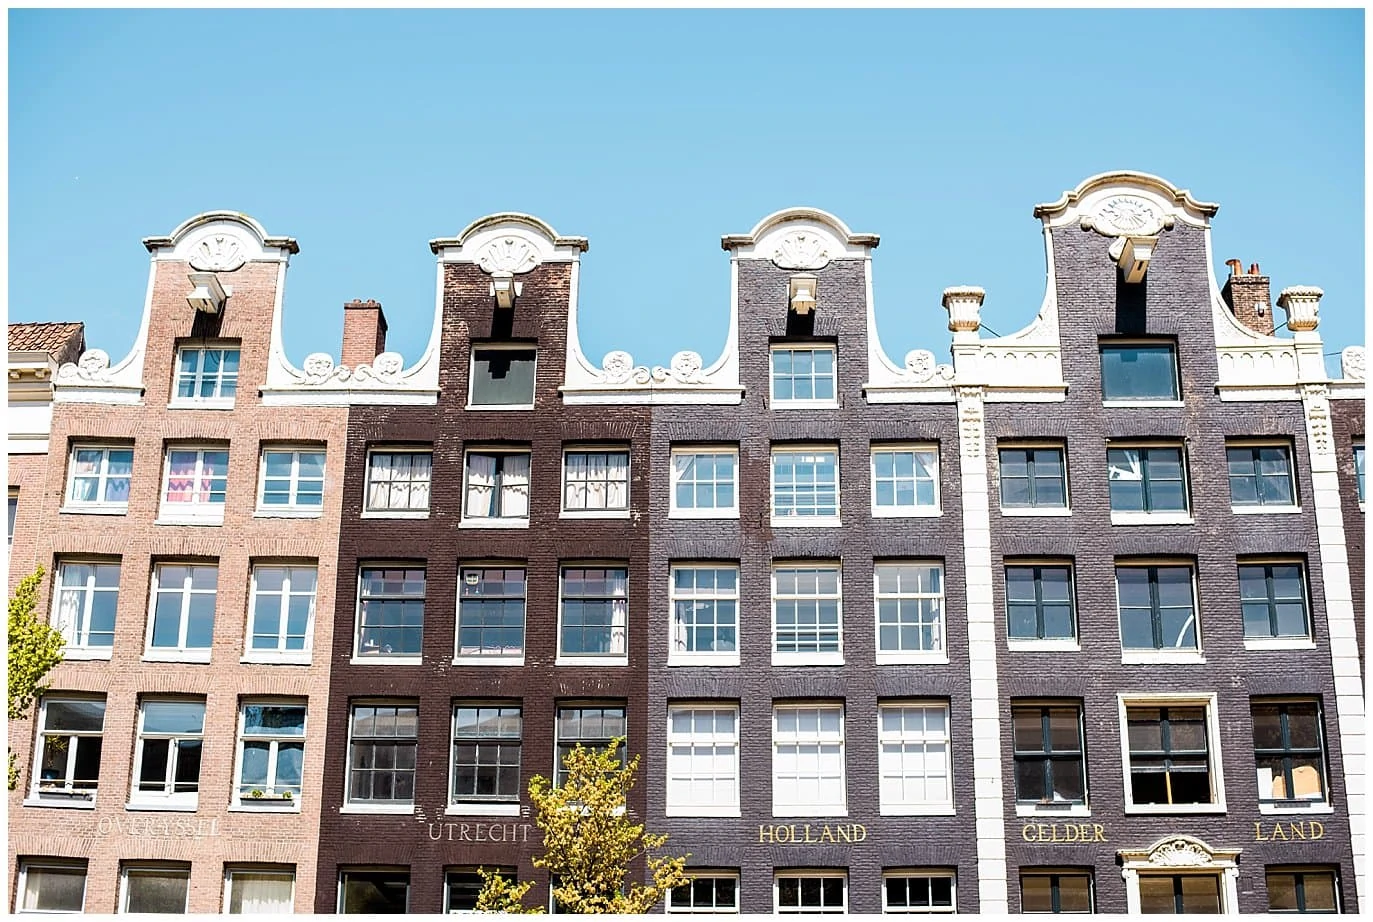 amsterdam canal houses photo